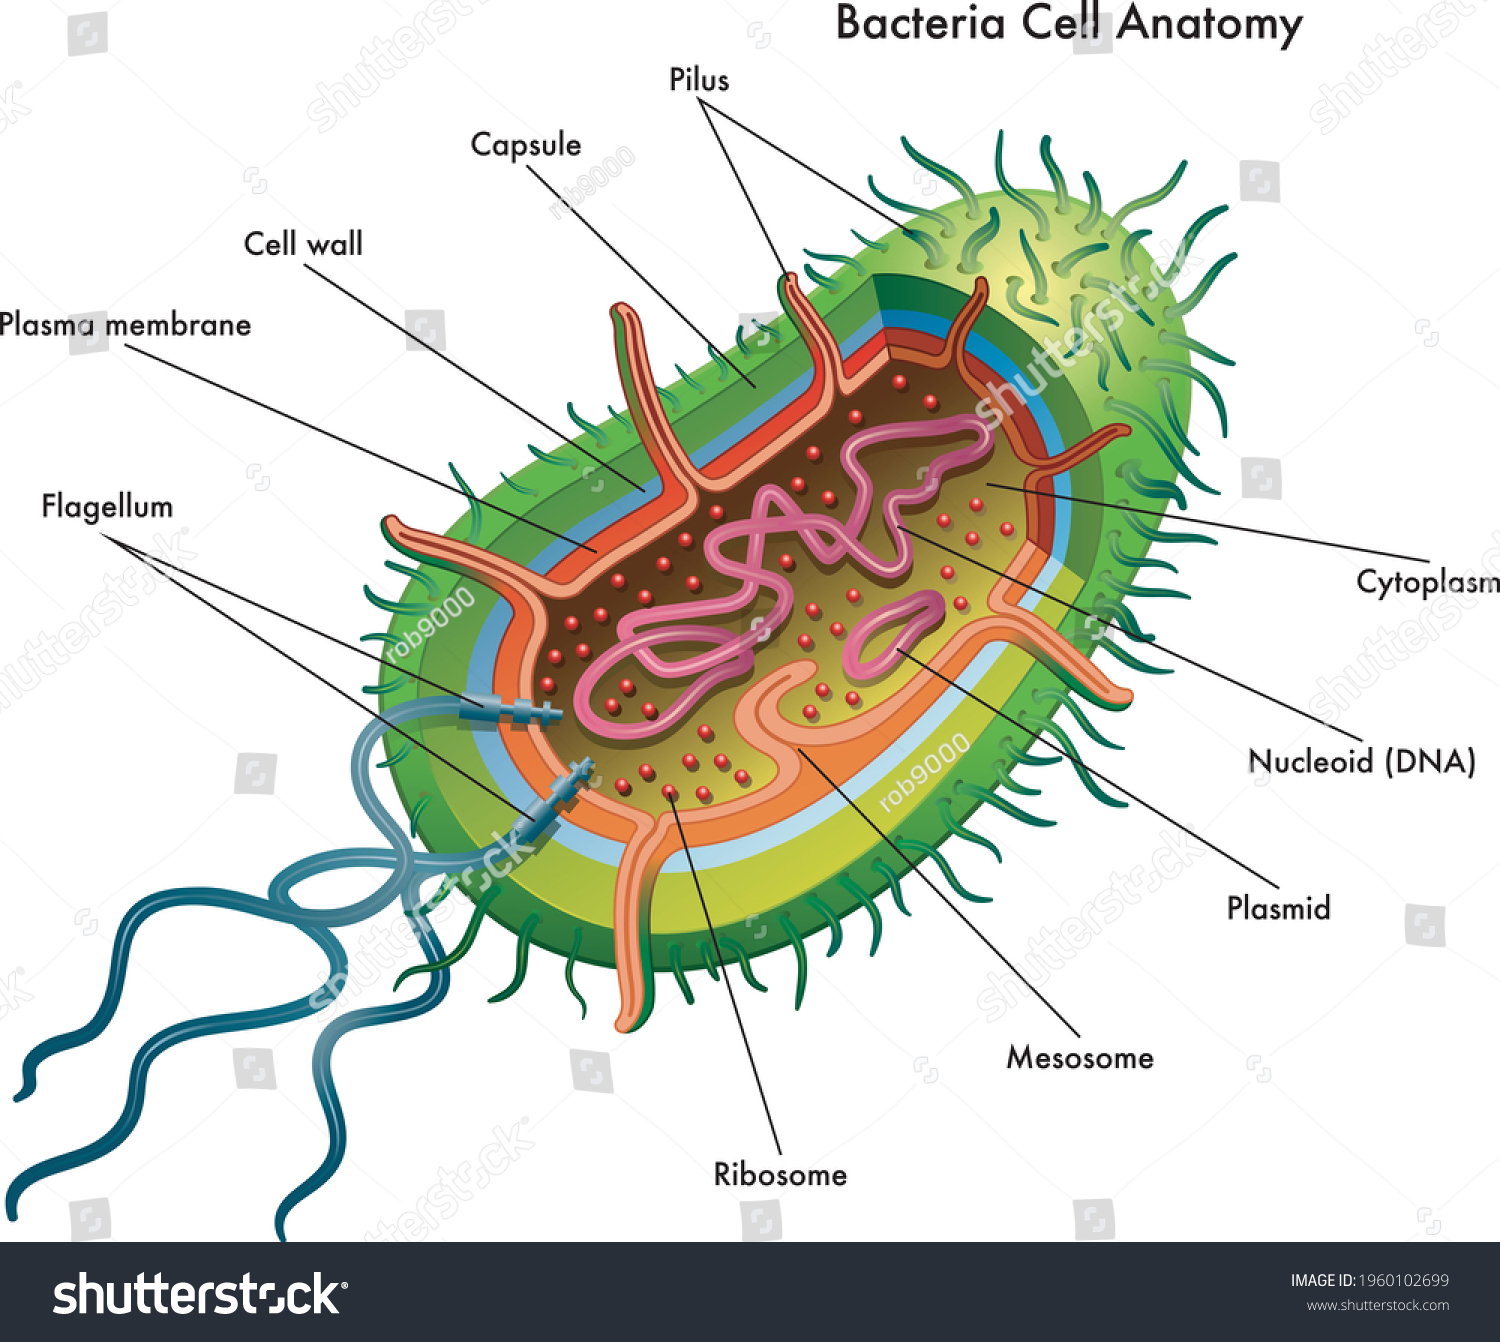 995 Bacterial cell diagram Images, Stock Photos & Vectors | Shutterstock